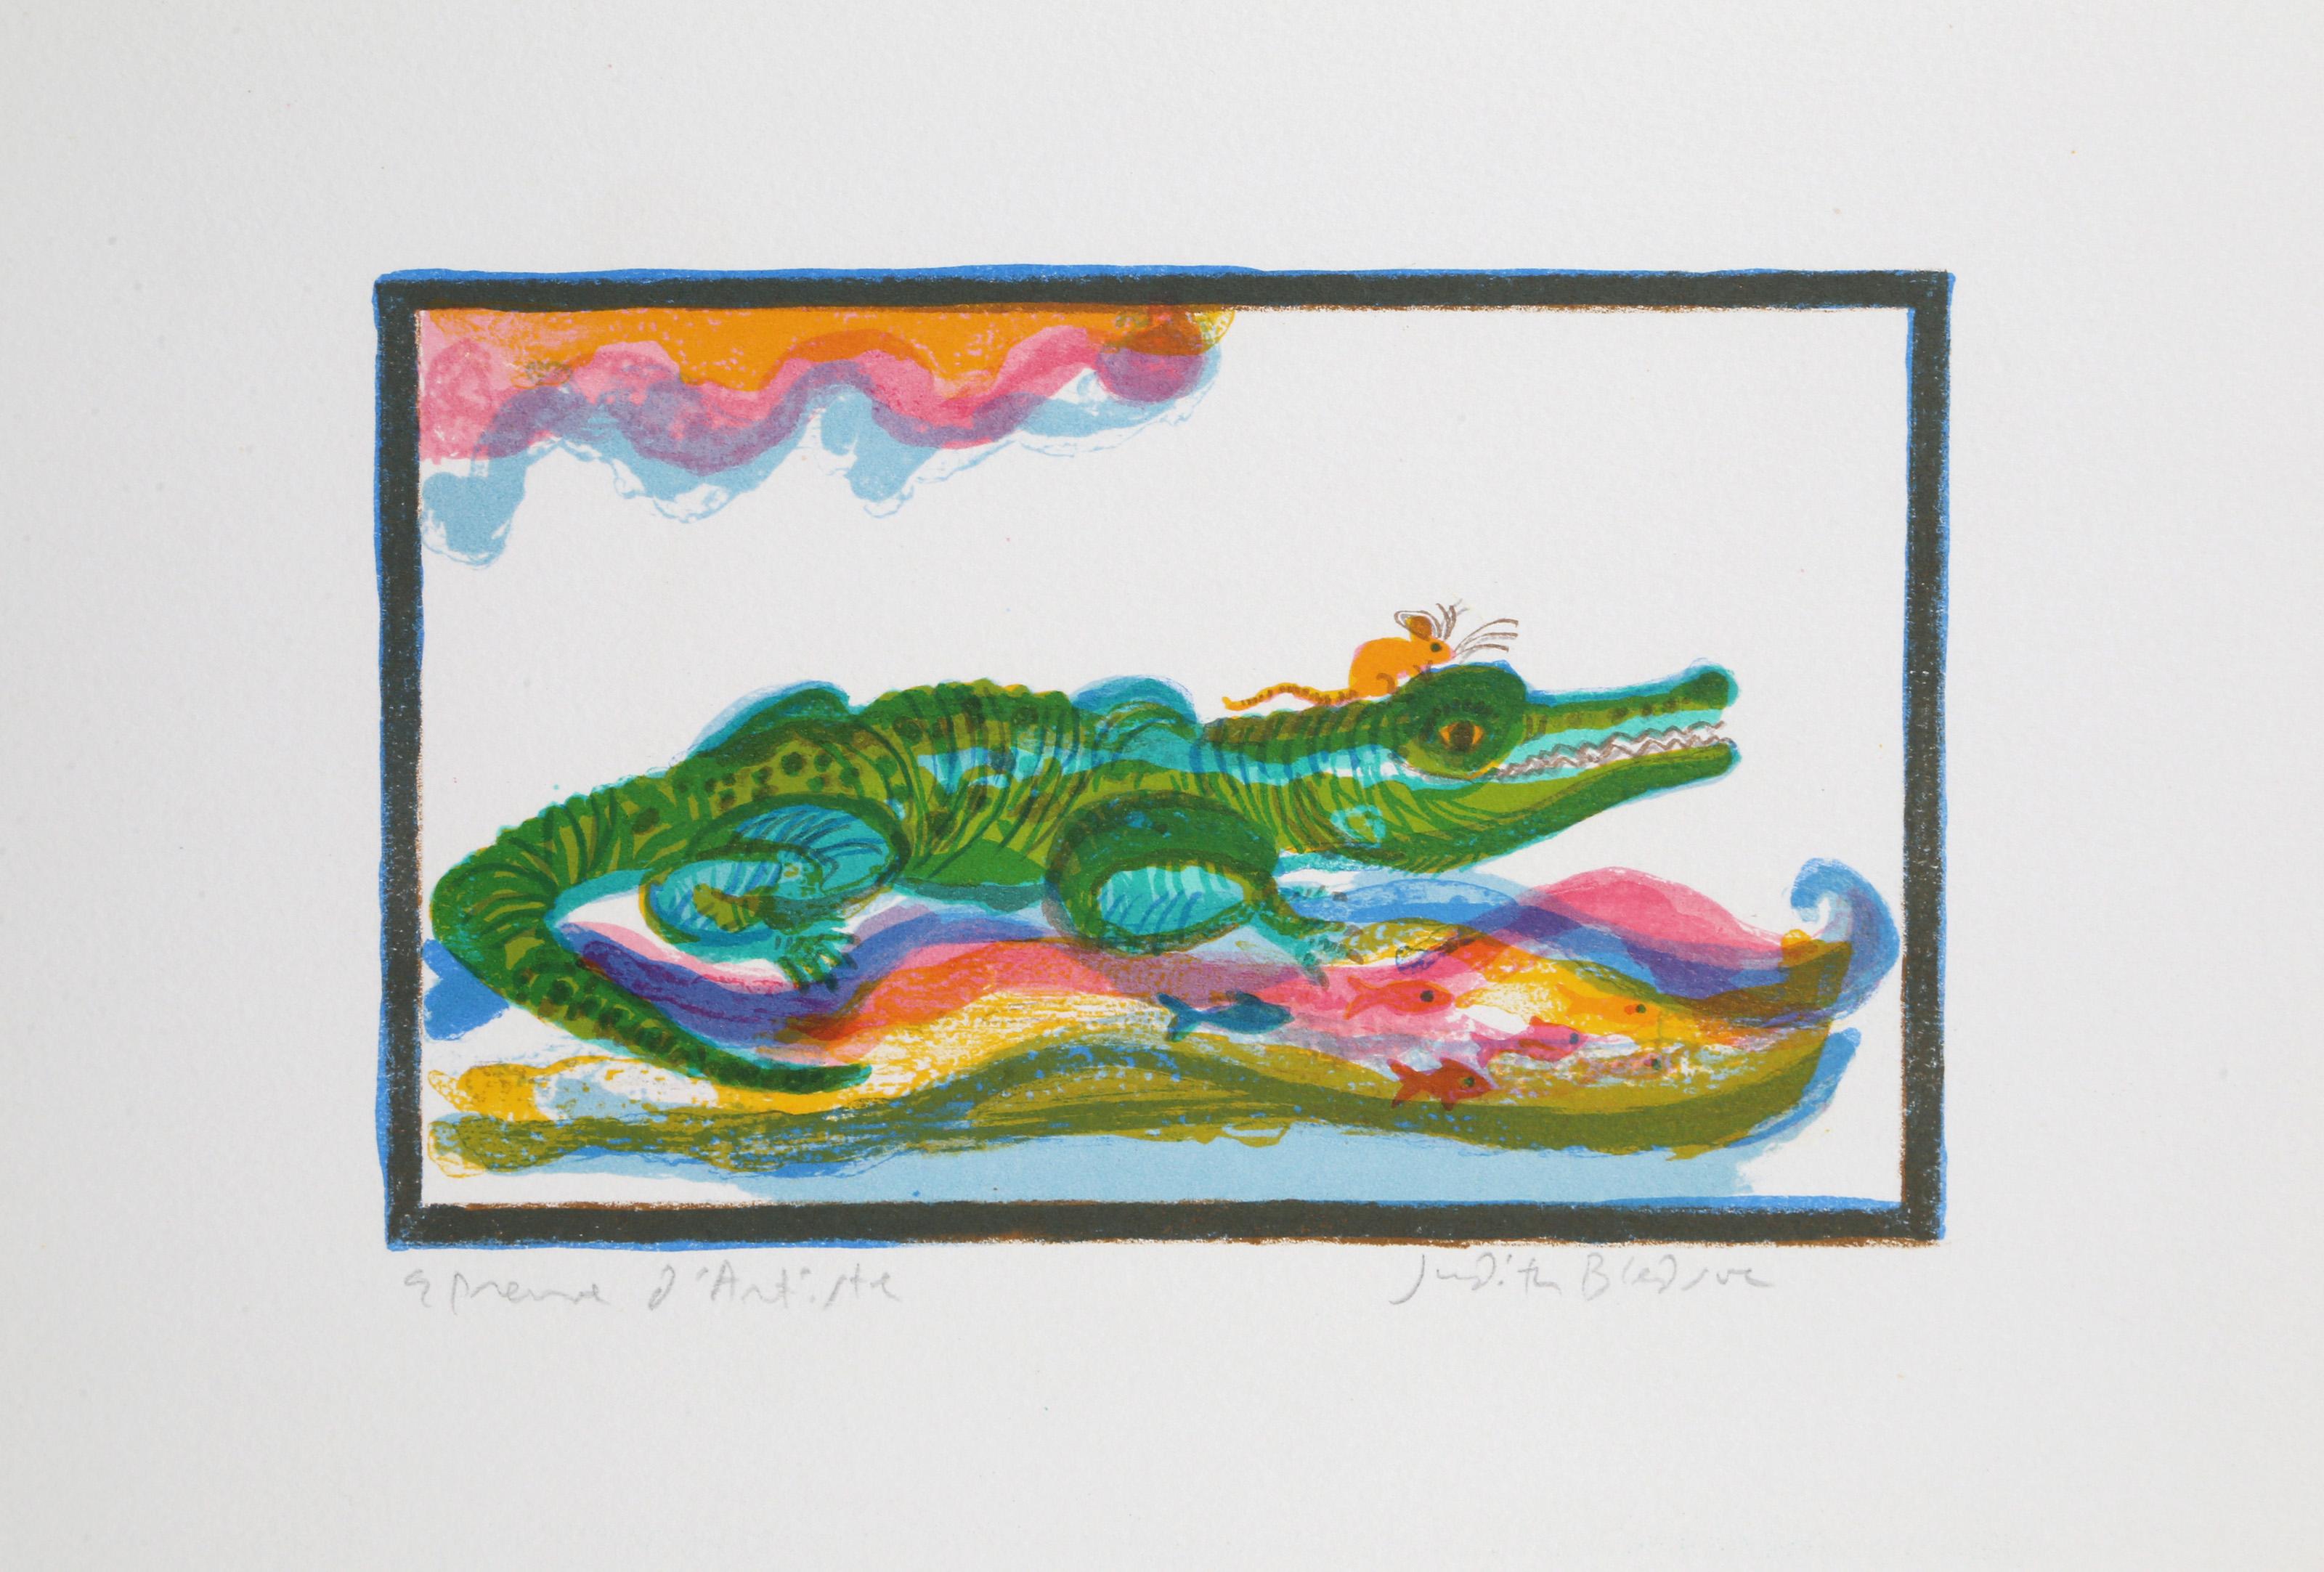 Judith Bledsoe, American (1938 - 2013) -  Alligator. Year: circa 1974, Medium: Lithograph, signed in pencil, Edition: EA, Image Size: 5.5 x 8 inches, Size: 10.5  x 15 in. (26.67  x 38.1 cm), Description: Resting in a river, the crocodile in this